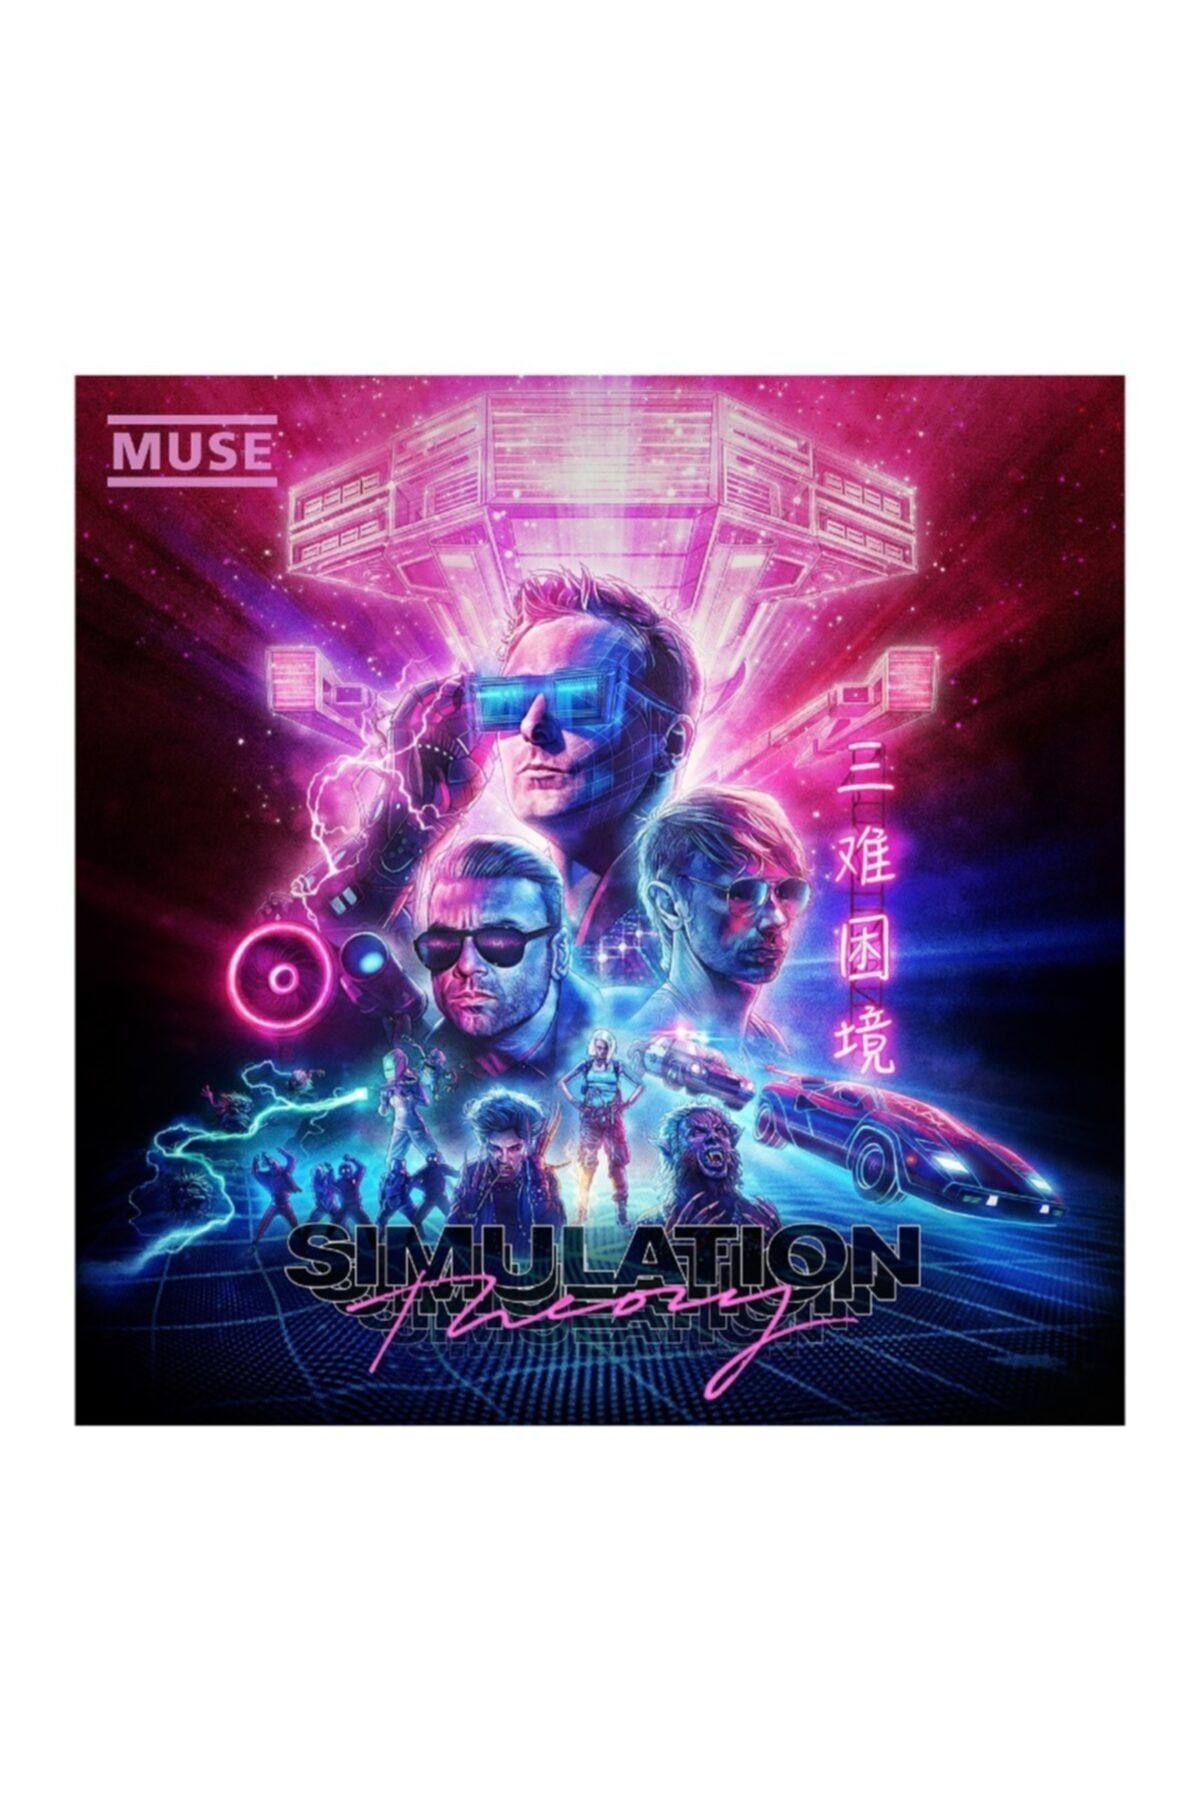 Warner Music Group Simulation Theory (deluxe Edition) - Cd Muse